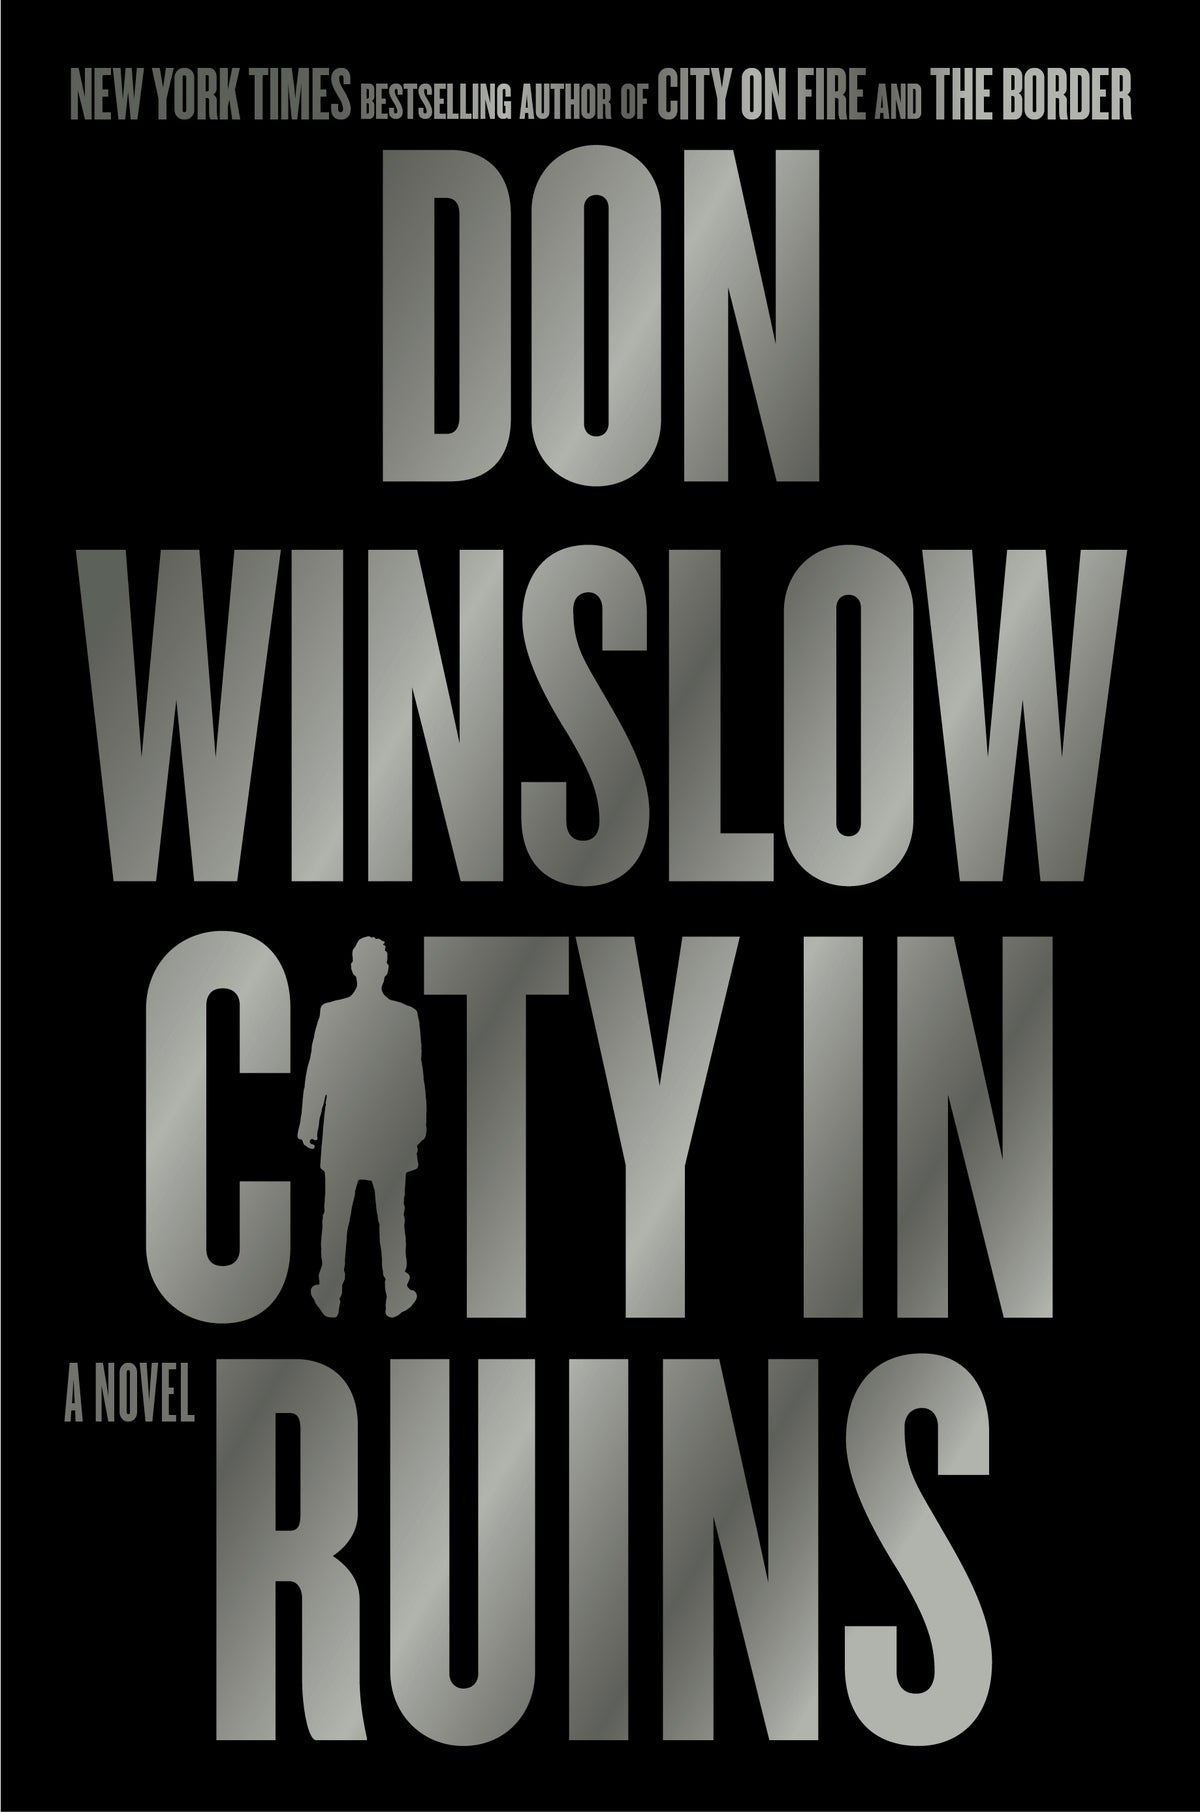 Book Review: ‘City of Ruins’ completes a masterful Don Winslow trilogy